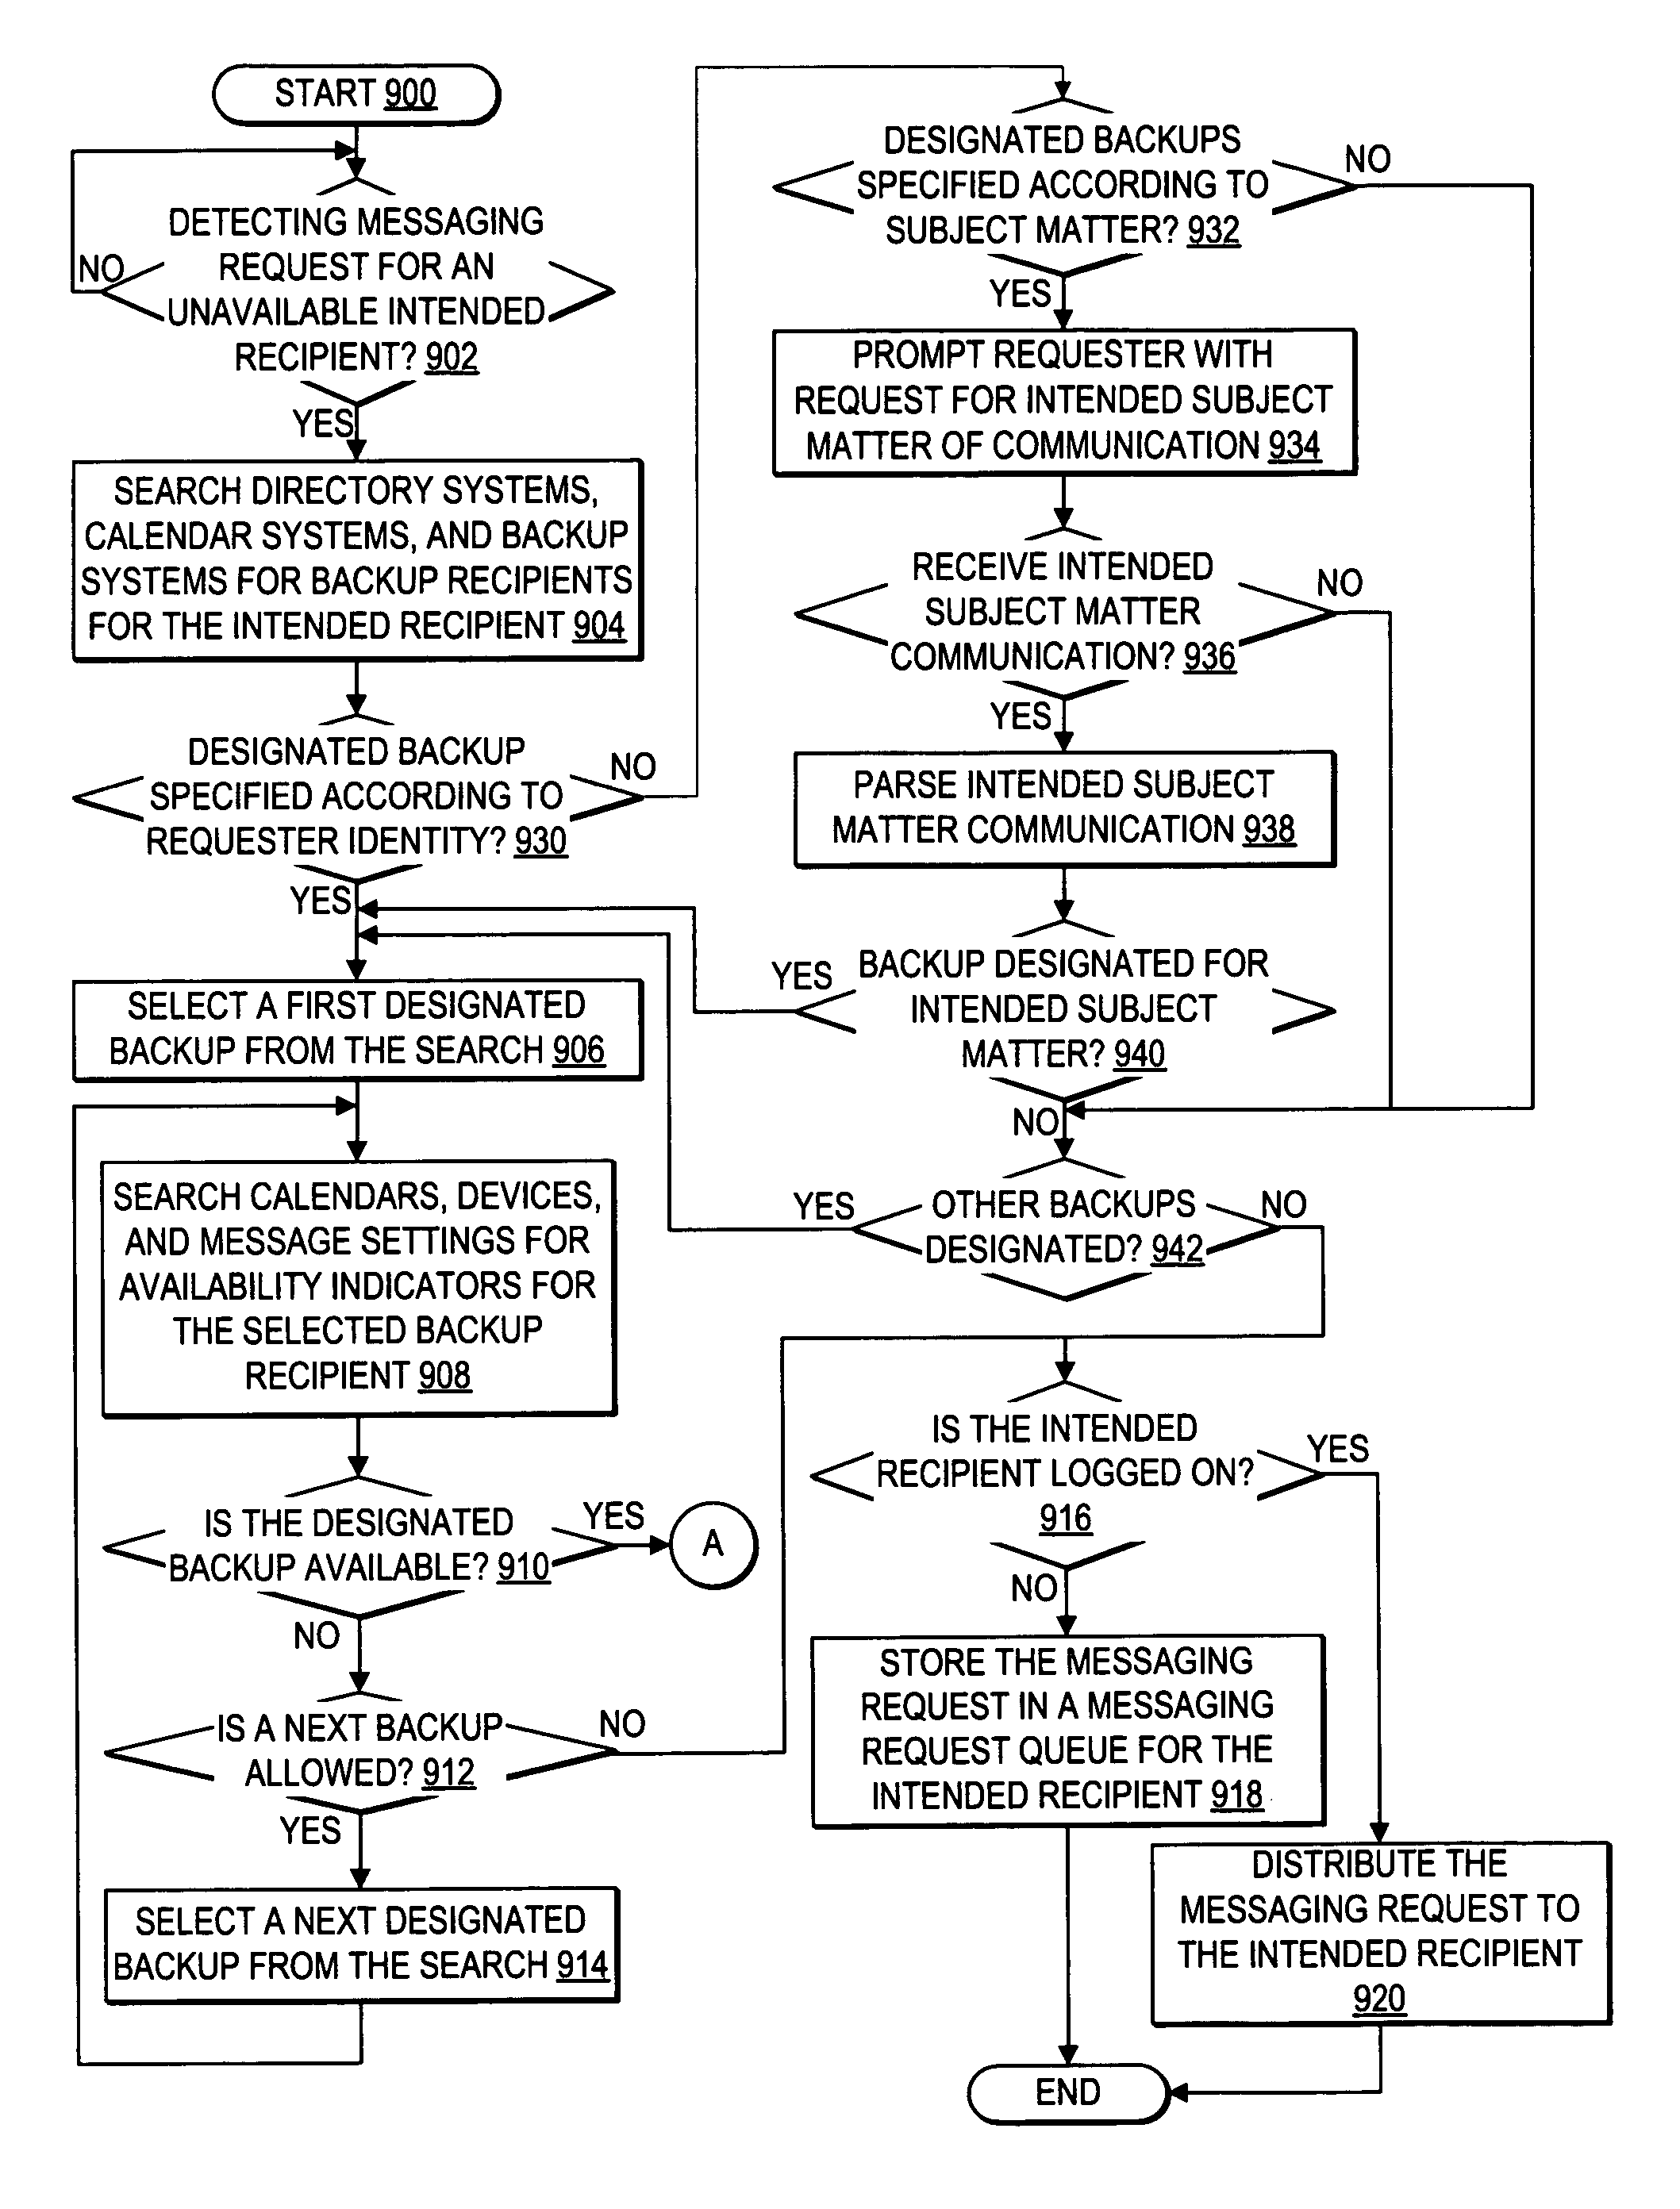 Automated distribution of an instant messaging request for an unavailable intended recipient to a backup recipient